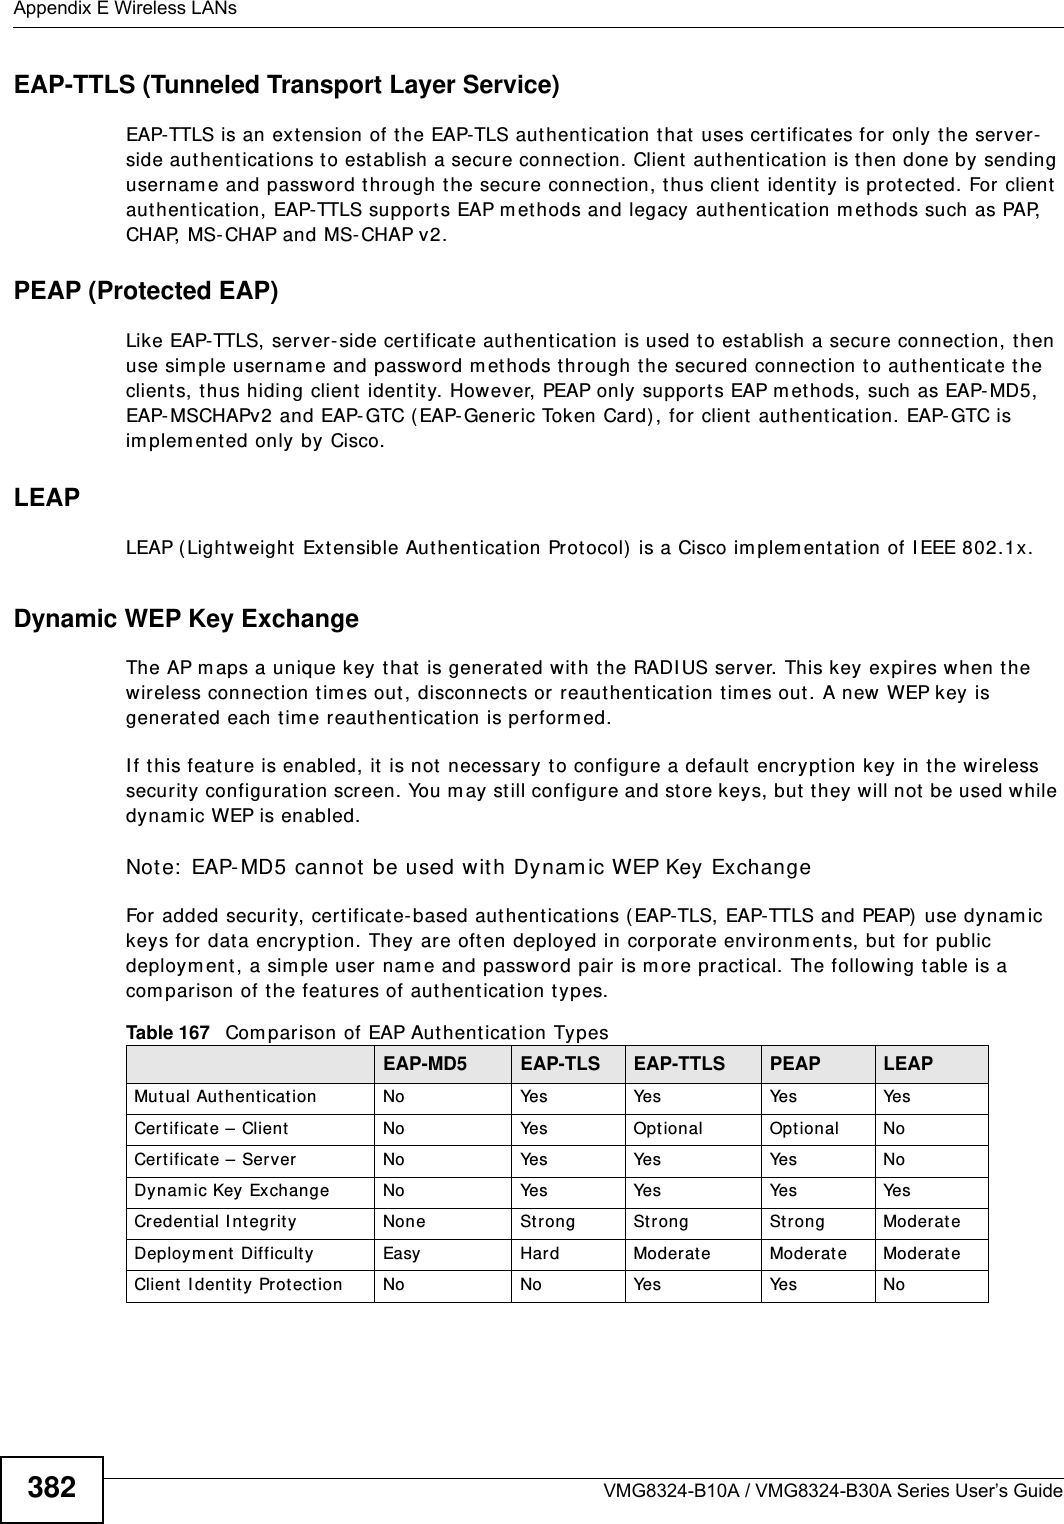 Appendix E Wireless LANsVMG8324-B10A / VMG8324-B30A Series User’s Guide382EAP-TTLS (Tunneled Transport Layer Service) EAP-TTLS is an ext ension of the EAP-TLS aut hentication that uses cert ificat es for only the server-side aut hentications t o est ablish a secure connection. Client authenticat ion is t hen done by sending usernam e and password through t he secure connection, t hus client identity is protected. For client authent icat ion, EAP-TTLS supports EAP m et hods and legacy authent icat ion m ethods such as PAP, CHAP, MS-CHAP and MS-CHAP v2. PEAP (Protected EAP)   Like EAP-TTLS, server- side cert ificate aut hent icat ion is used t o establish a secure connect ion, then use sim ple usernam e and password m ethods t hr ough the secured connection to aut hent icat e the client s, t hus hiding client  ident ity. However, PEAP only support s EAP m ethods, such as EAP-MD5, EAP- MSCHAPv2 and EAP- GTC ( EAP- Generic Token Card), for client  aut hentication. EAP- GTC is im plem ented only by Cisco.LEAPLEAP (Light weight Ext ensible Authent icat ion Protocol)  is a Cisco im plem ent at ion of I EEE 802.1x. Dynamic WEP Key ExchangeThe AP maps a unique key that is generat ed with the RADI US server. This key expir es w hen t he wireless connection tim es out , disconnect s or r eaut hentication tim es out. A new WEP key is generat ed each t im e reauthentication is perform ed.I f this feature is enabled, it  is not  necessary to configure a default encr yption key in t he wireless security configurat ion screen. You m ay st ill configure and stor e keys, but they will not be used while dynam ic WEP is enabled.Note:  EAP- MD5 cannot  be used wit h Dynam ic WEP Key ExchangeFor added security, certificat e-based authent ications ( EAP-TLS, EAP-TTLS and PEAP)  use dynam ic keys for dat a encryption. They are often deployed in corporate environm ents, but  for public deploym ent , a sim ple user nam e and password pair is m ore pract ical. The following t able is a com parison of the feat ures of authent ication t ypes.Table 167   Com parison of EAP Authent icat ion TypesEAP-MD5 EAP-TLS EAP-TTLS PEAP LEAPMut ual Authentication No Yes Yes Ye s YesCer t ificat e – Client No Yes Opt ional Optional NoCert ificate – Server No Yes Ye s Yes NoDynam ic Key  Exchange No Yes Ye s Yes Ye sCredential I ntegrit y None St rong St rong Strong ModerateDeploym ent  Difficult y Easy Hard Moderat e Moderat e Moderat eClient  I dent it y Pr ot ection No No Ye s Ye s No